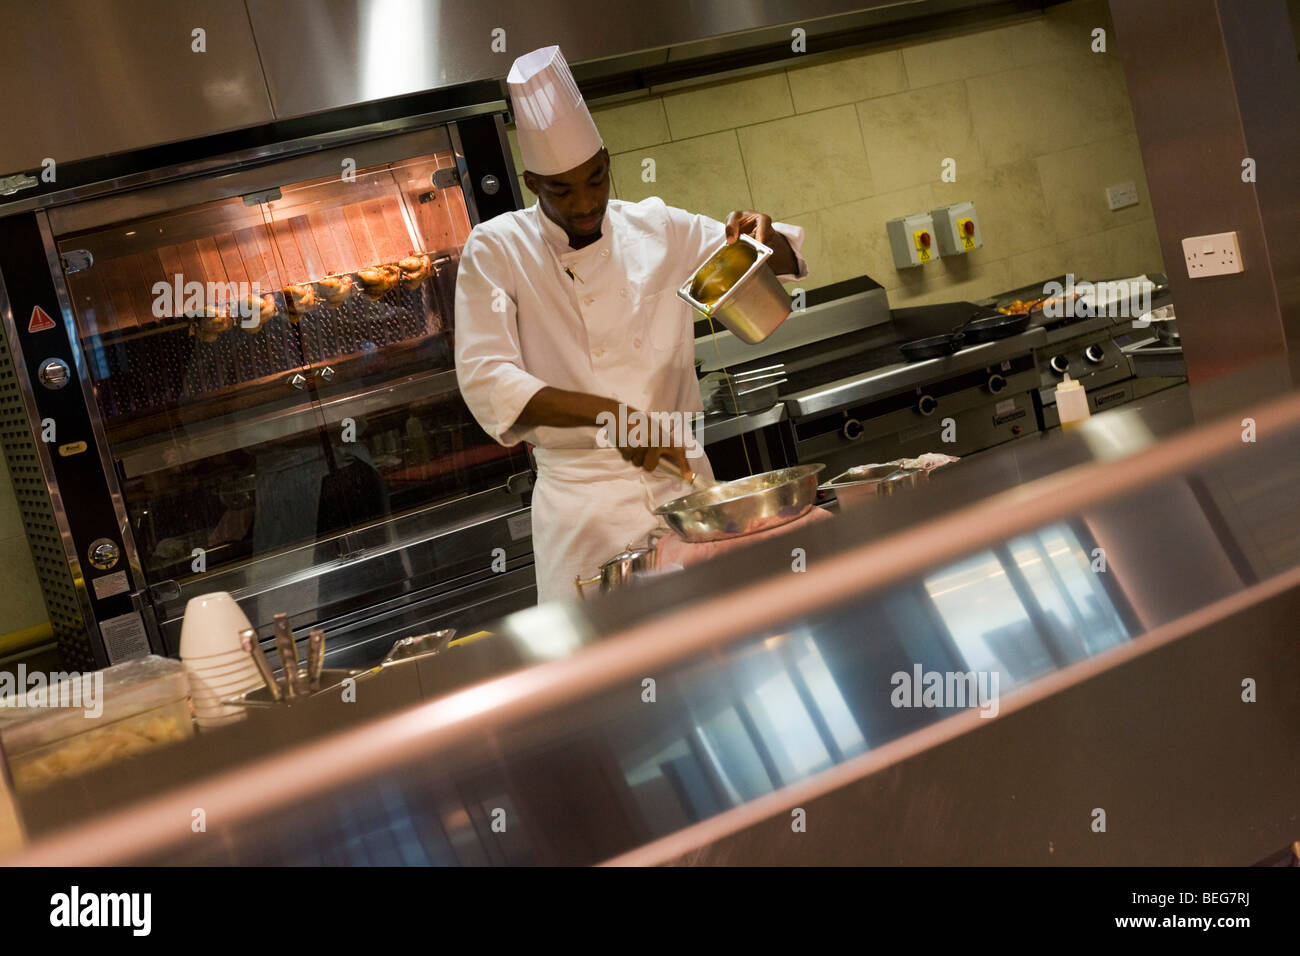 A chef pours liquids in the kitchens at the Vivre restaurant in Sofitel. Stock Photo